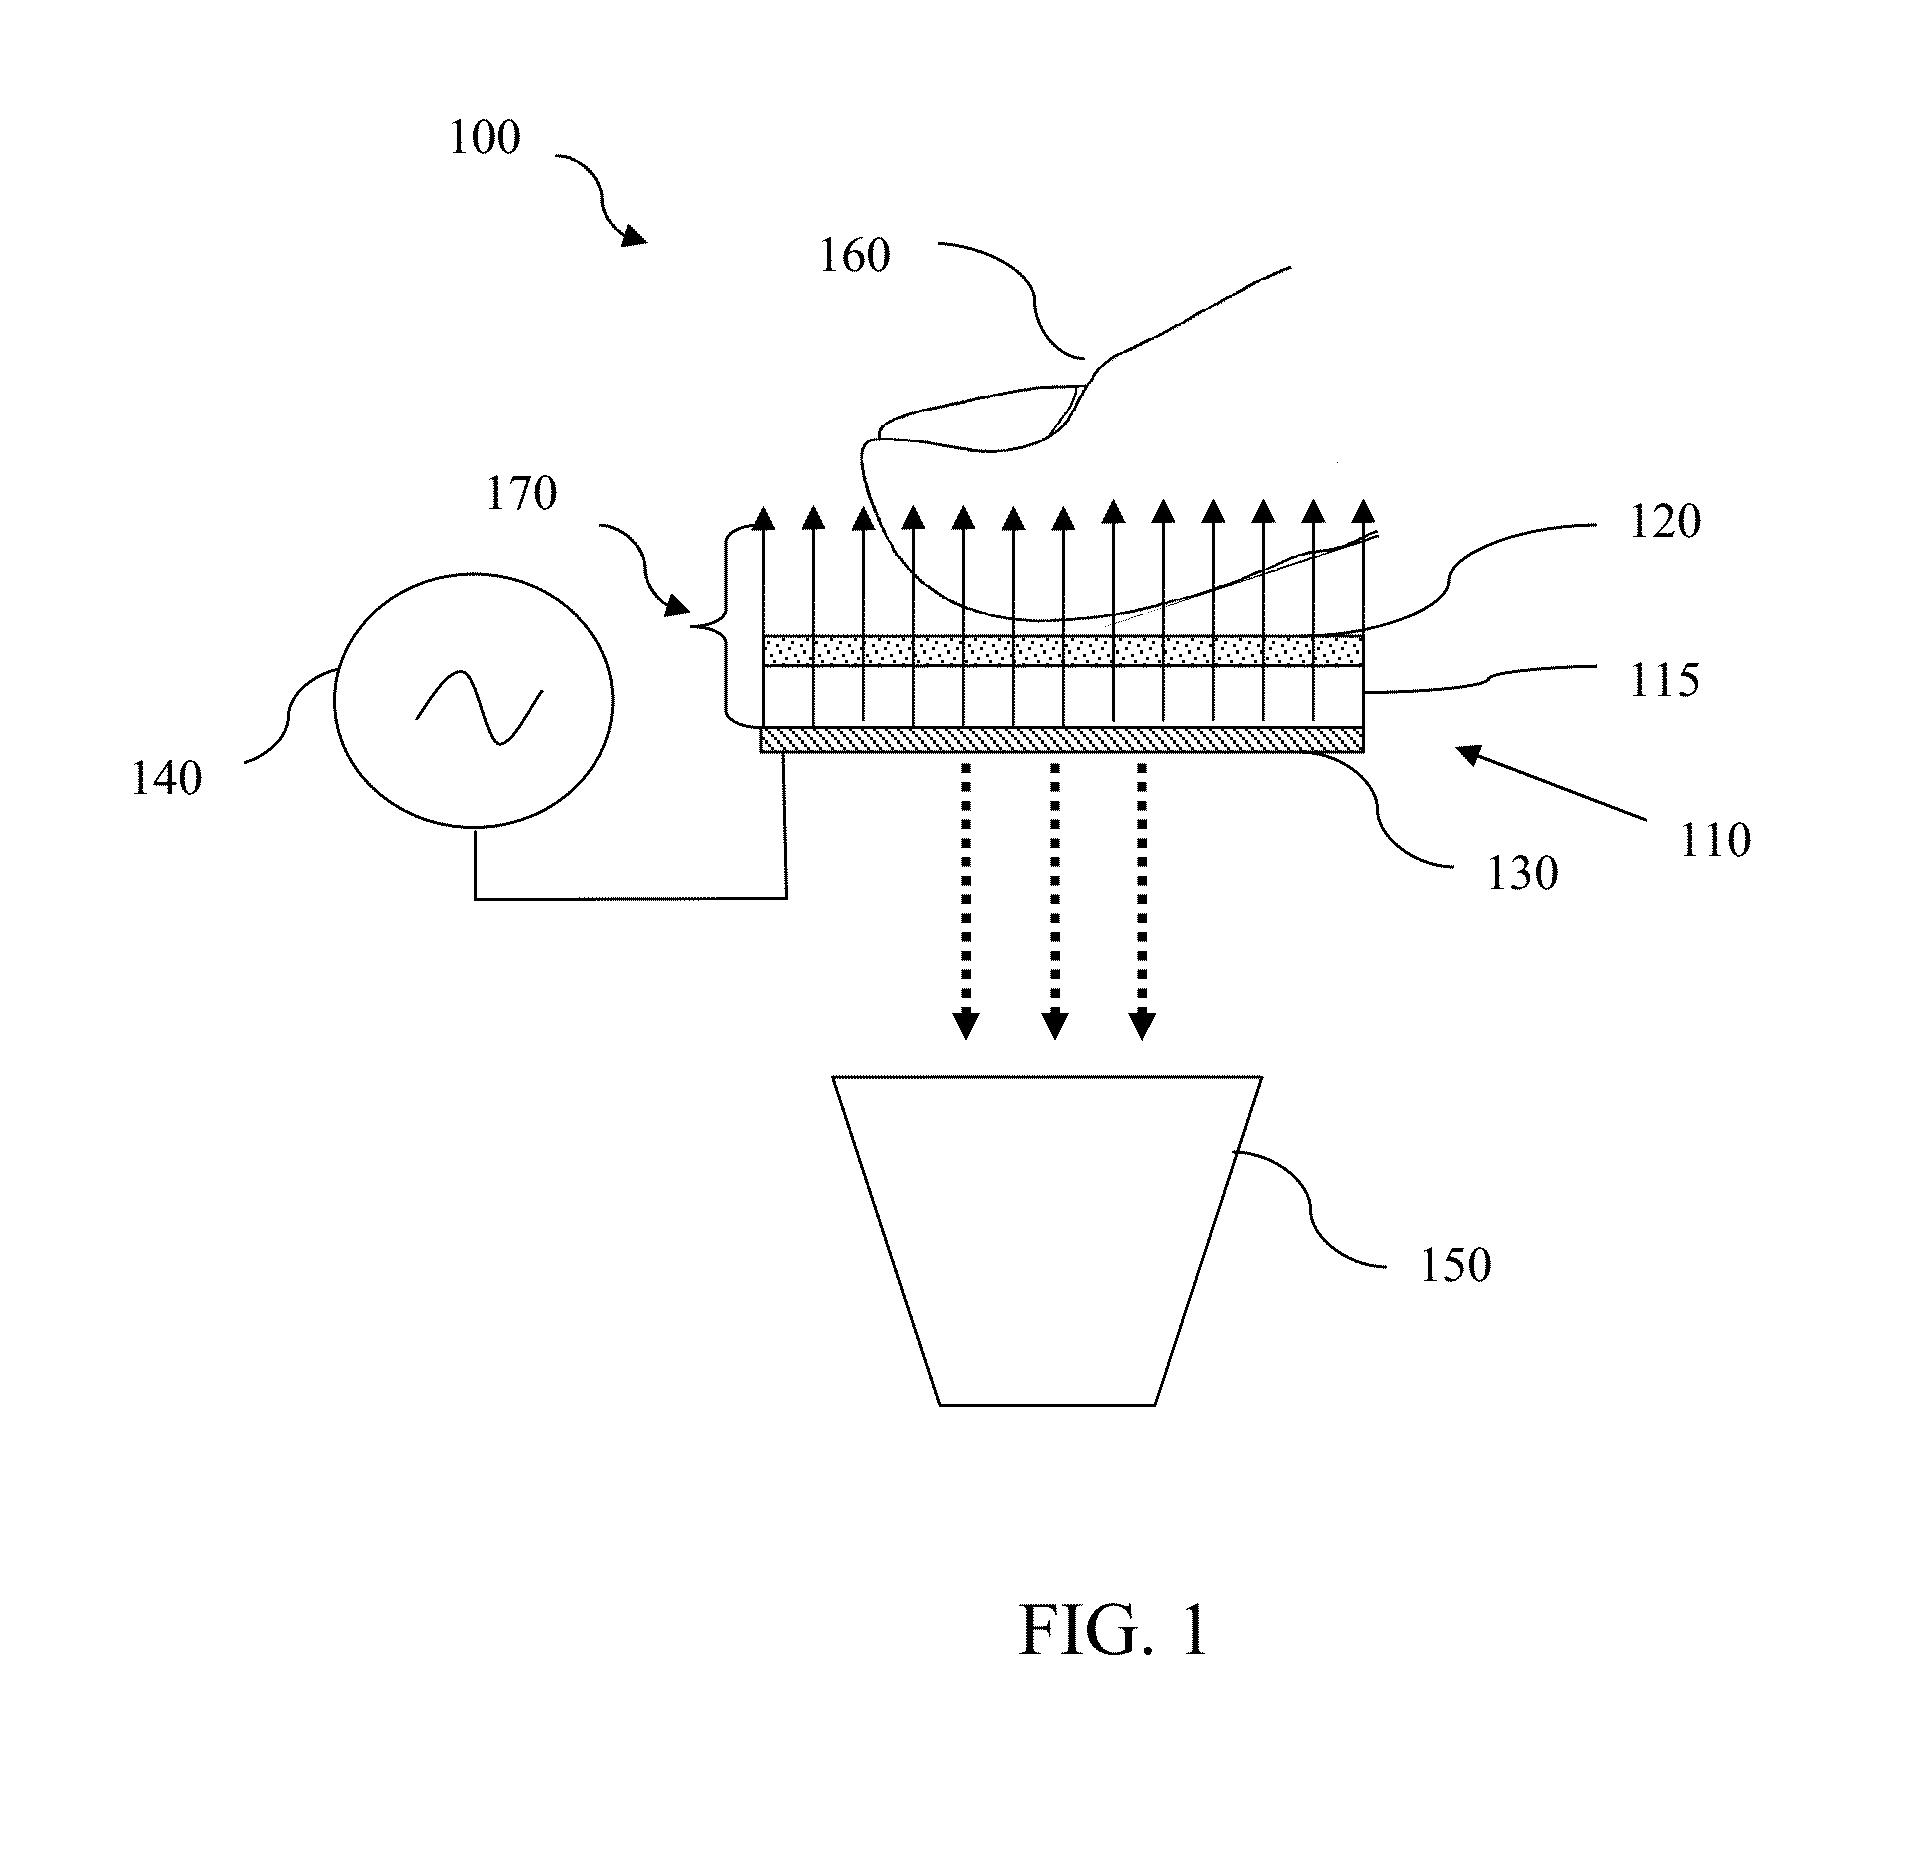 System, method and apparatus for electromagnetic detection and analysis of biometric information